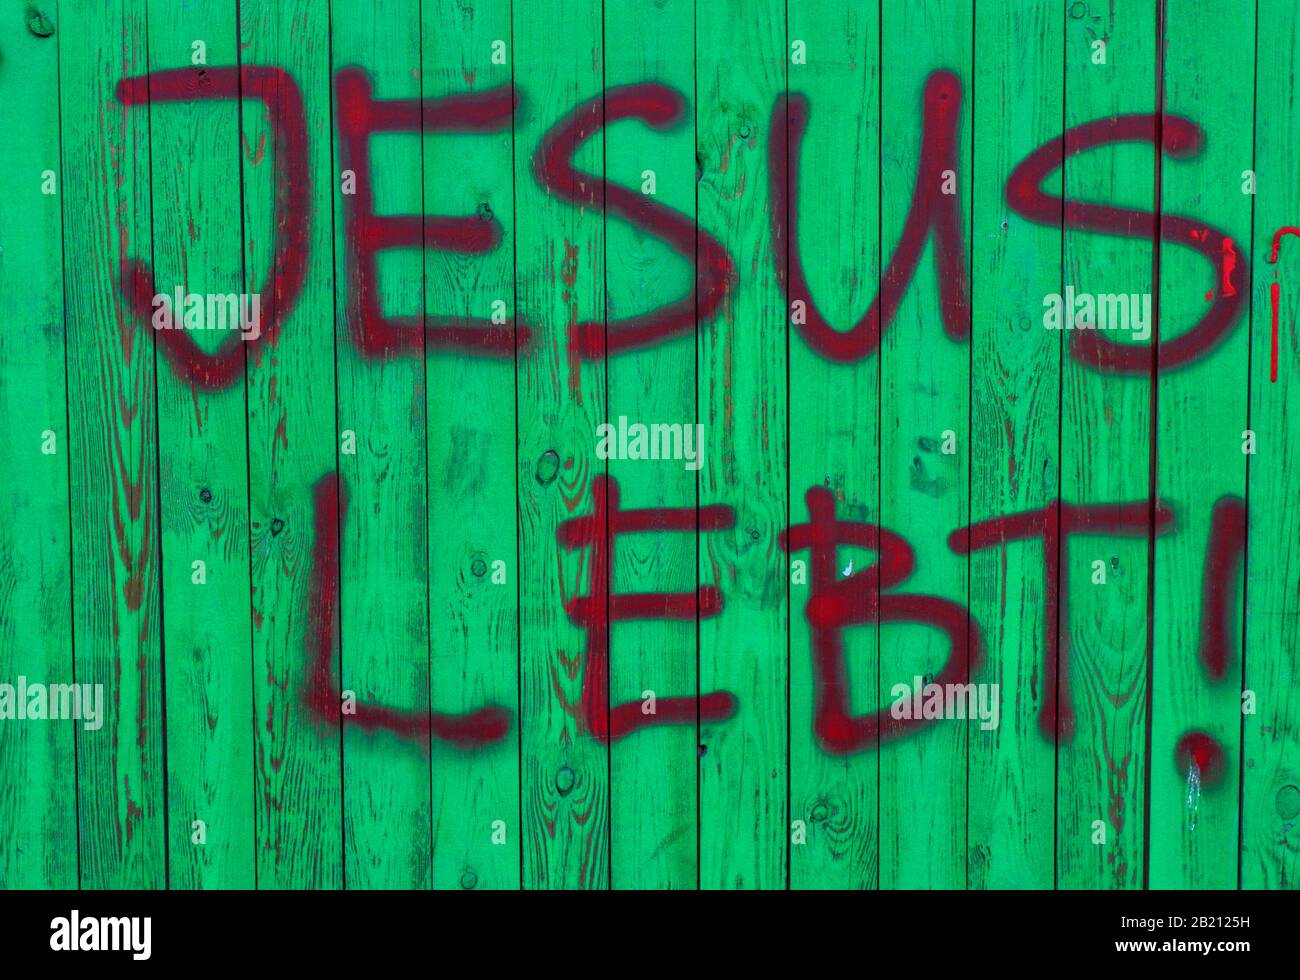 Writing Jesus lives, on a building fence, Berlin, Germany Stock Photo